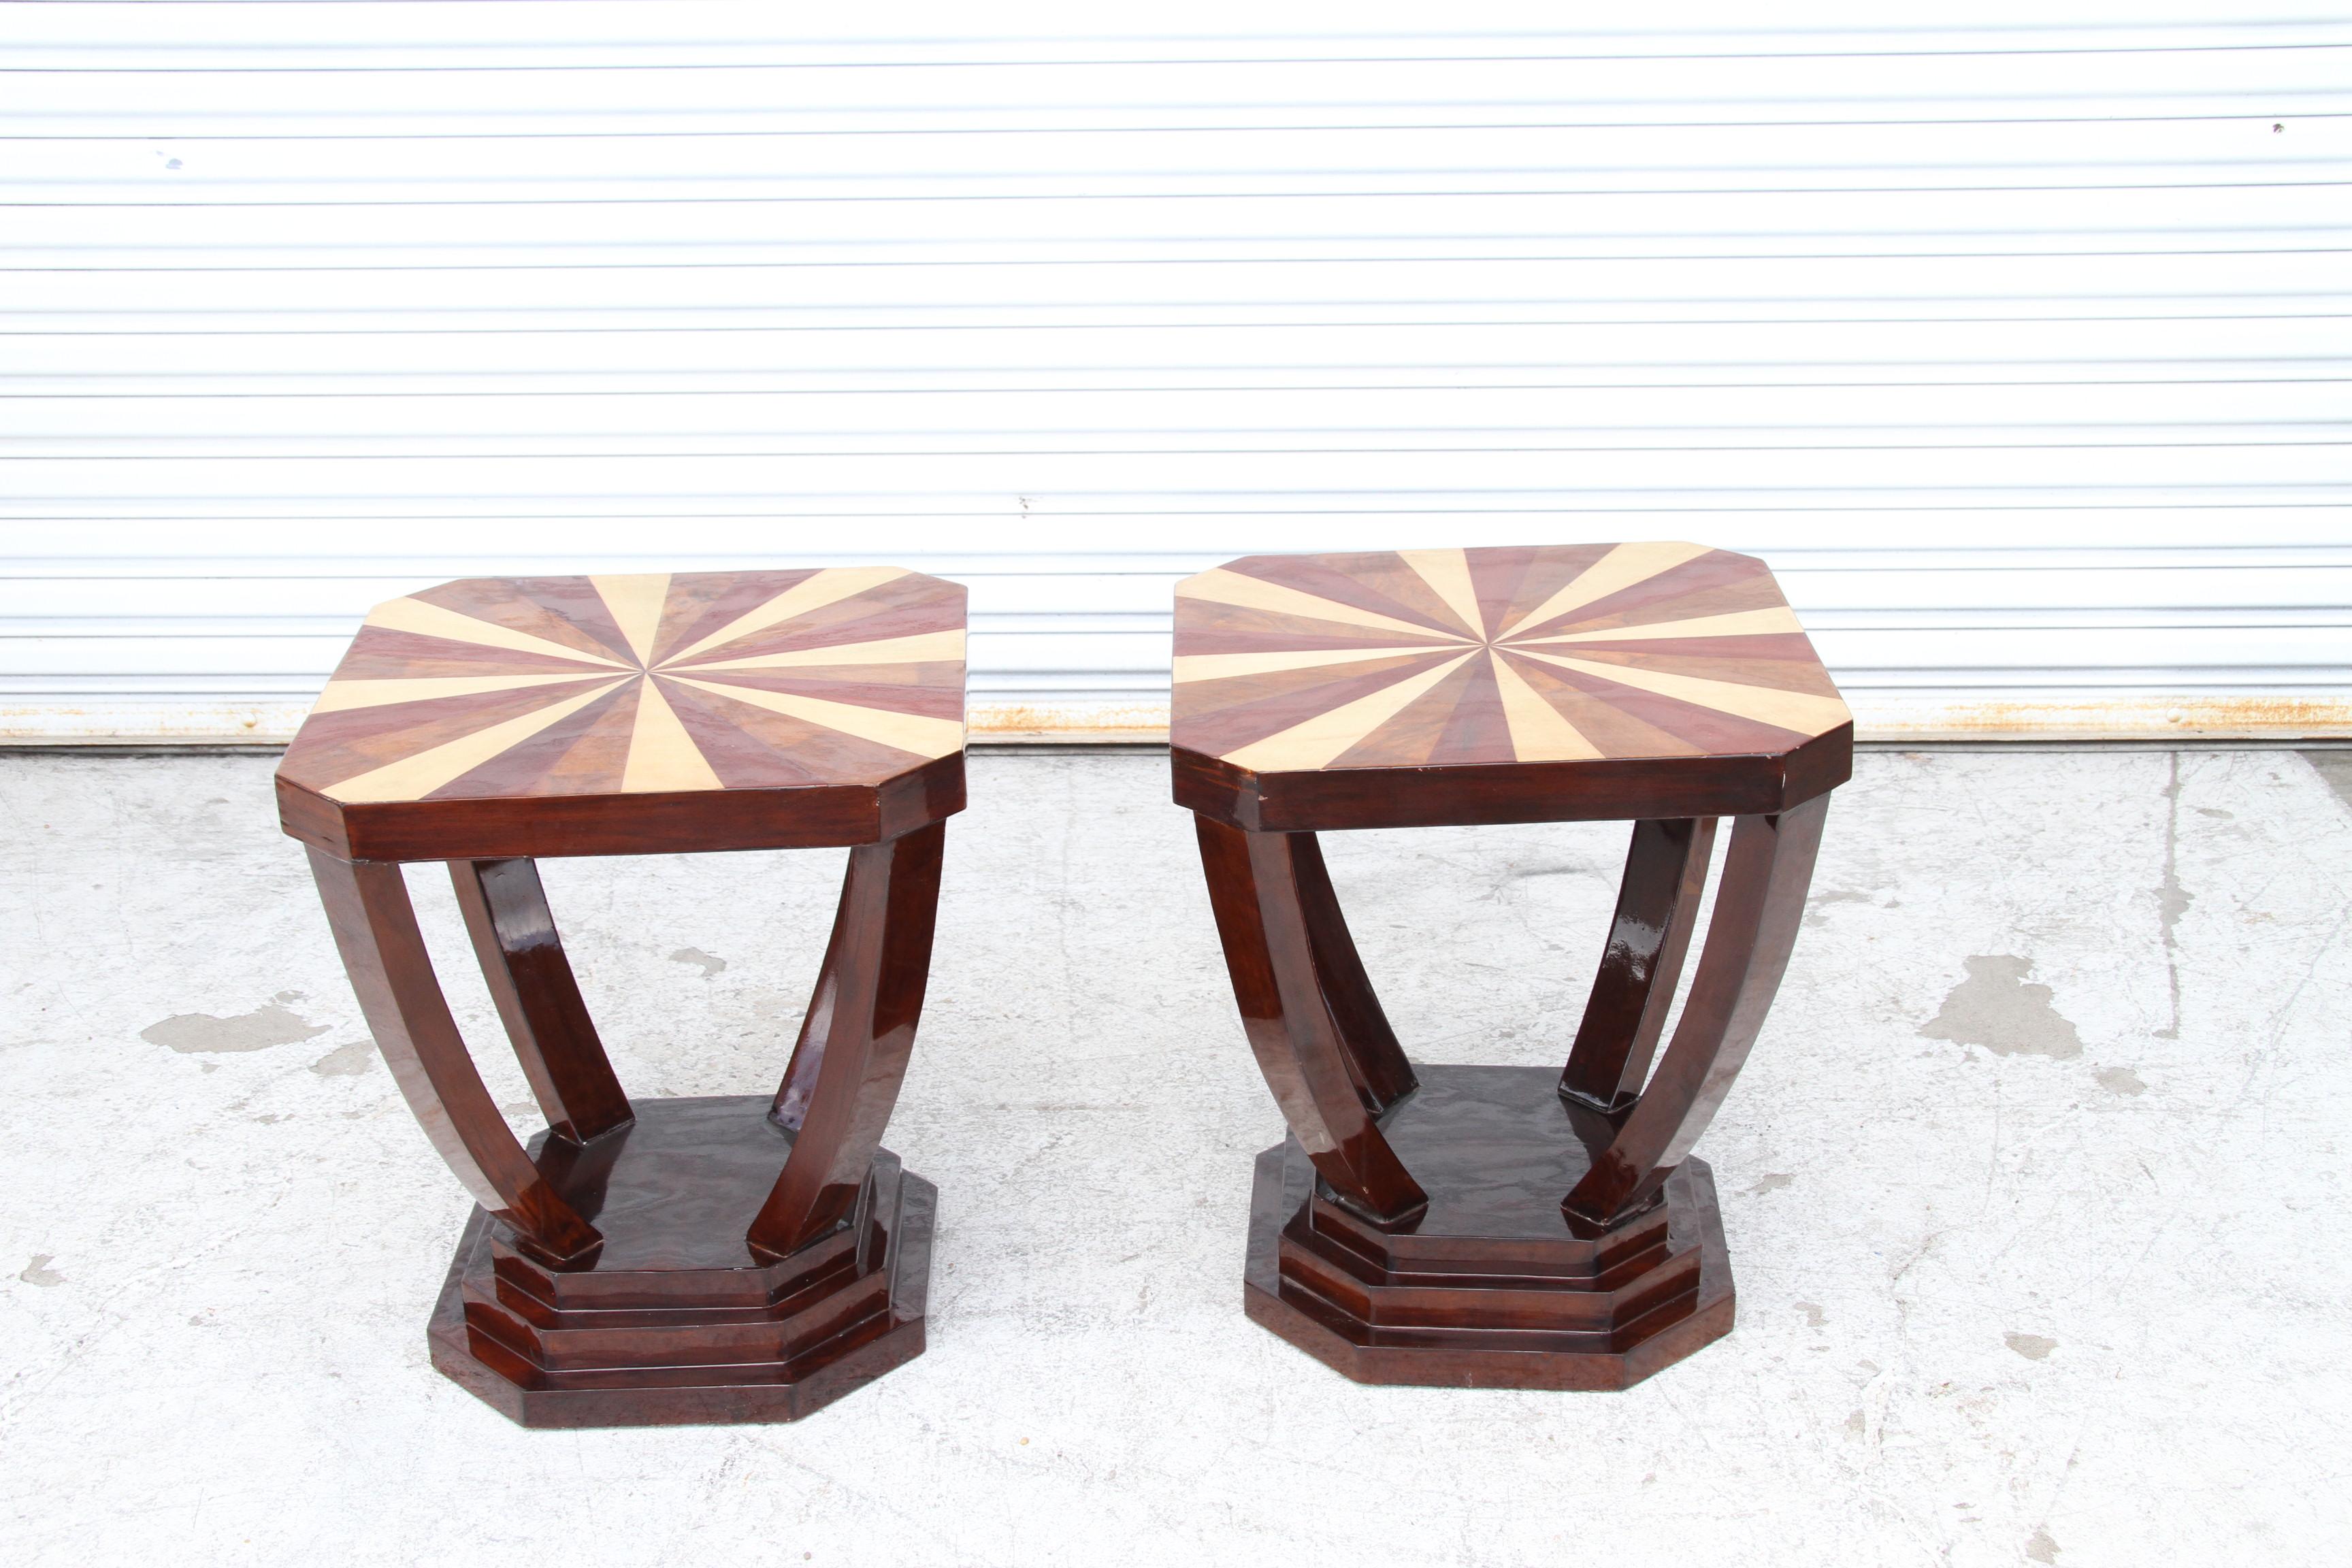 Pair Art Deco Style Side Tables

Rich burl and rosewood are combined in an alternating starburst pattern on a pedestal base.

19